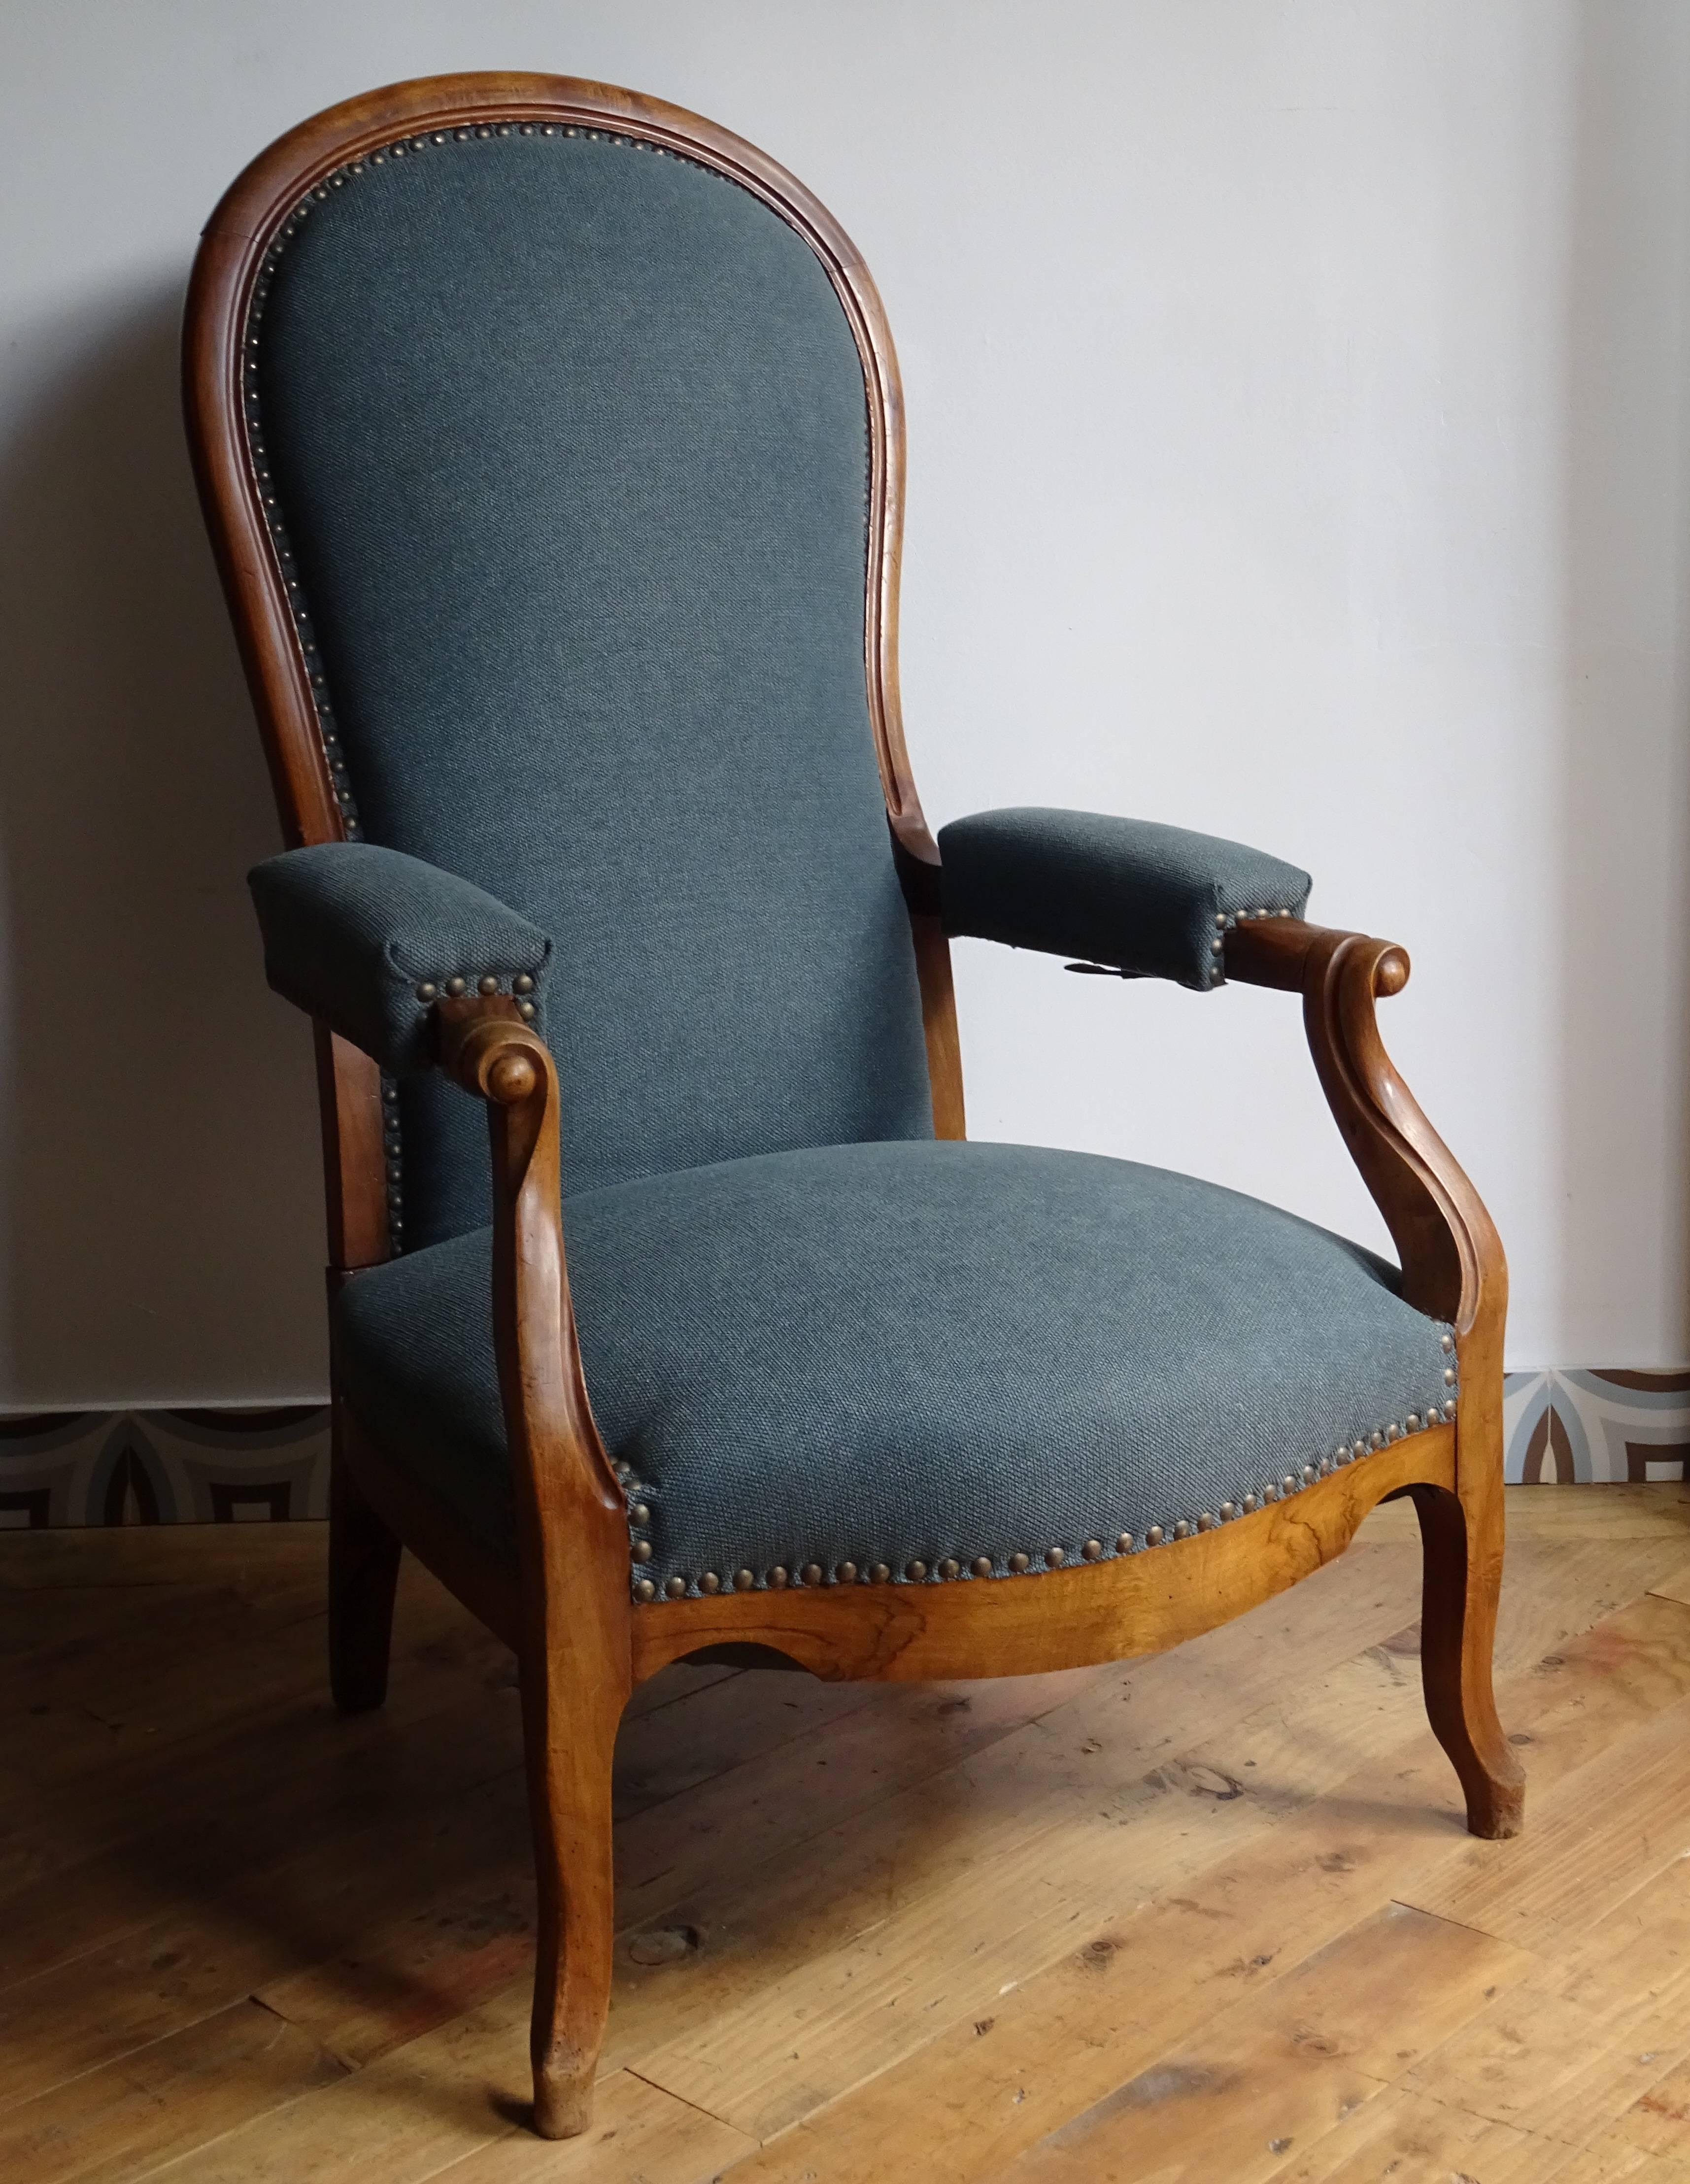 Walnut Voltaire armchair with new upholstery in gray-blue tones. The backrest can be tilted back with a lever system under the armrests. Ulphostery renewed.

 